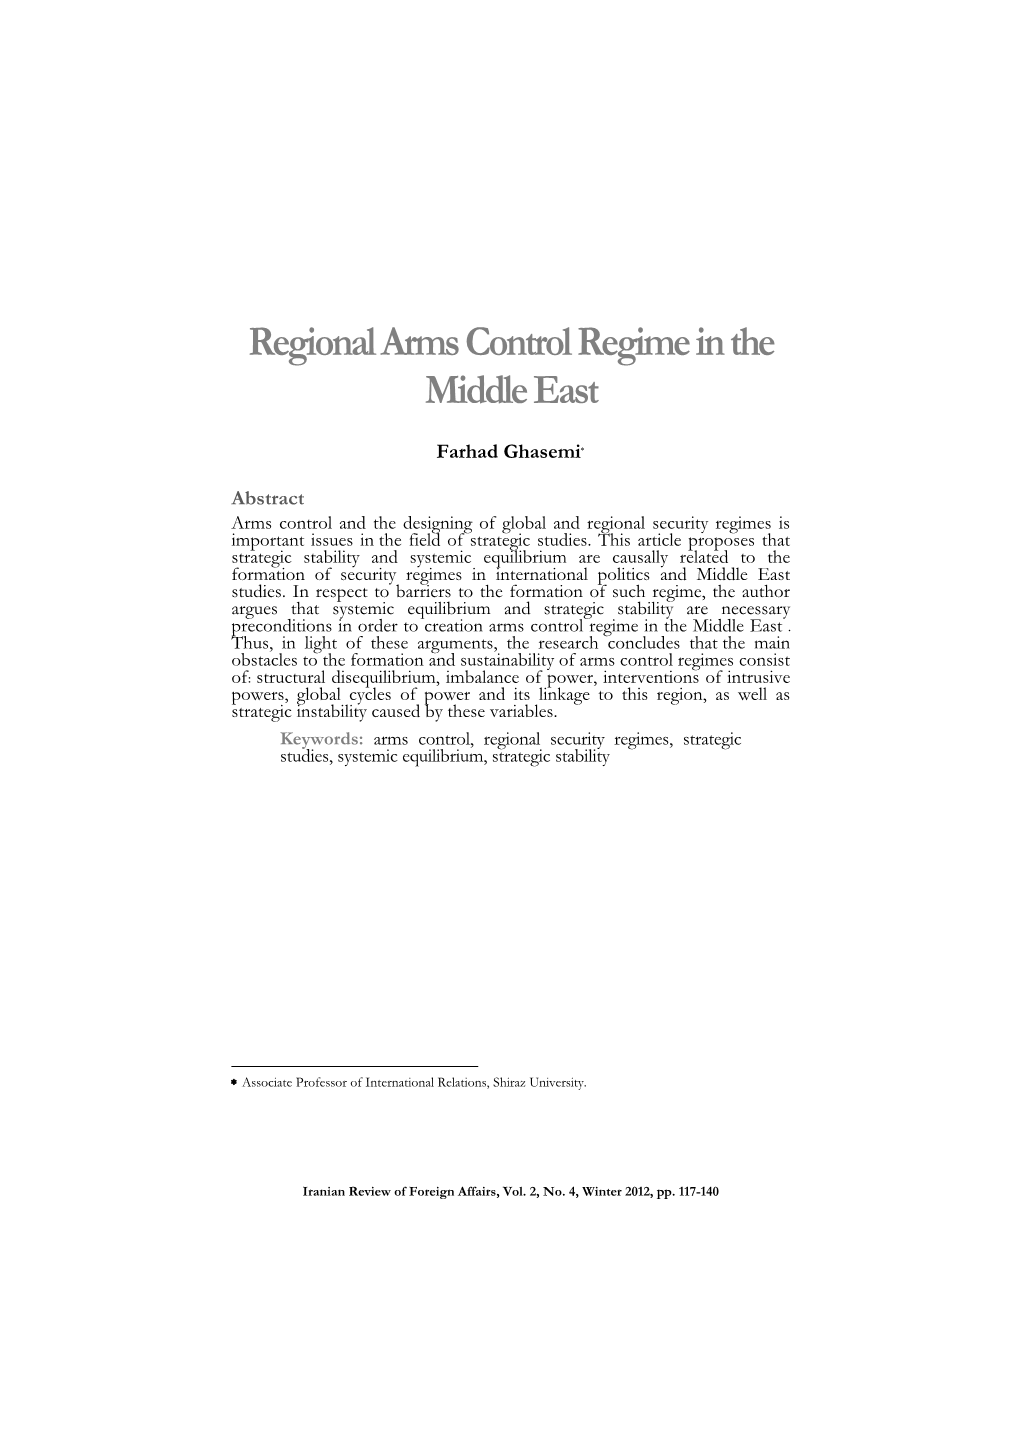 Regional Arms Control Regime in the Middle East